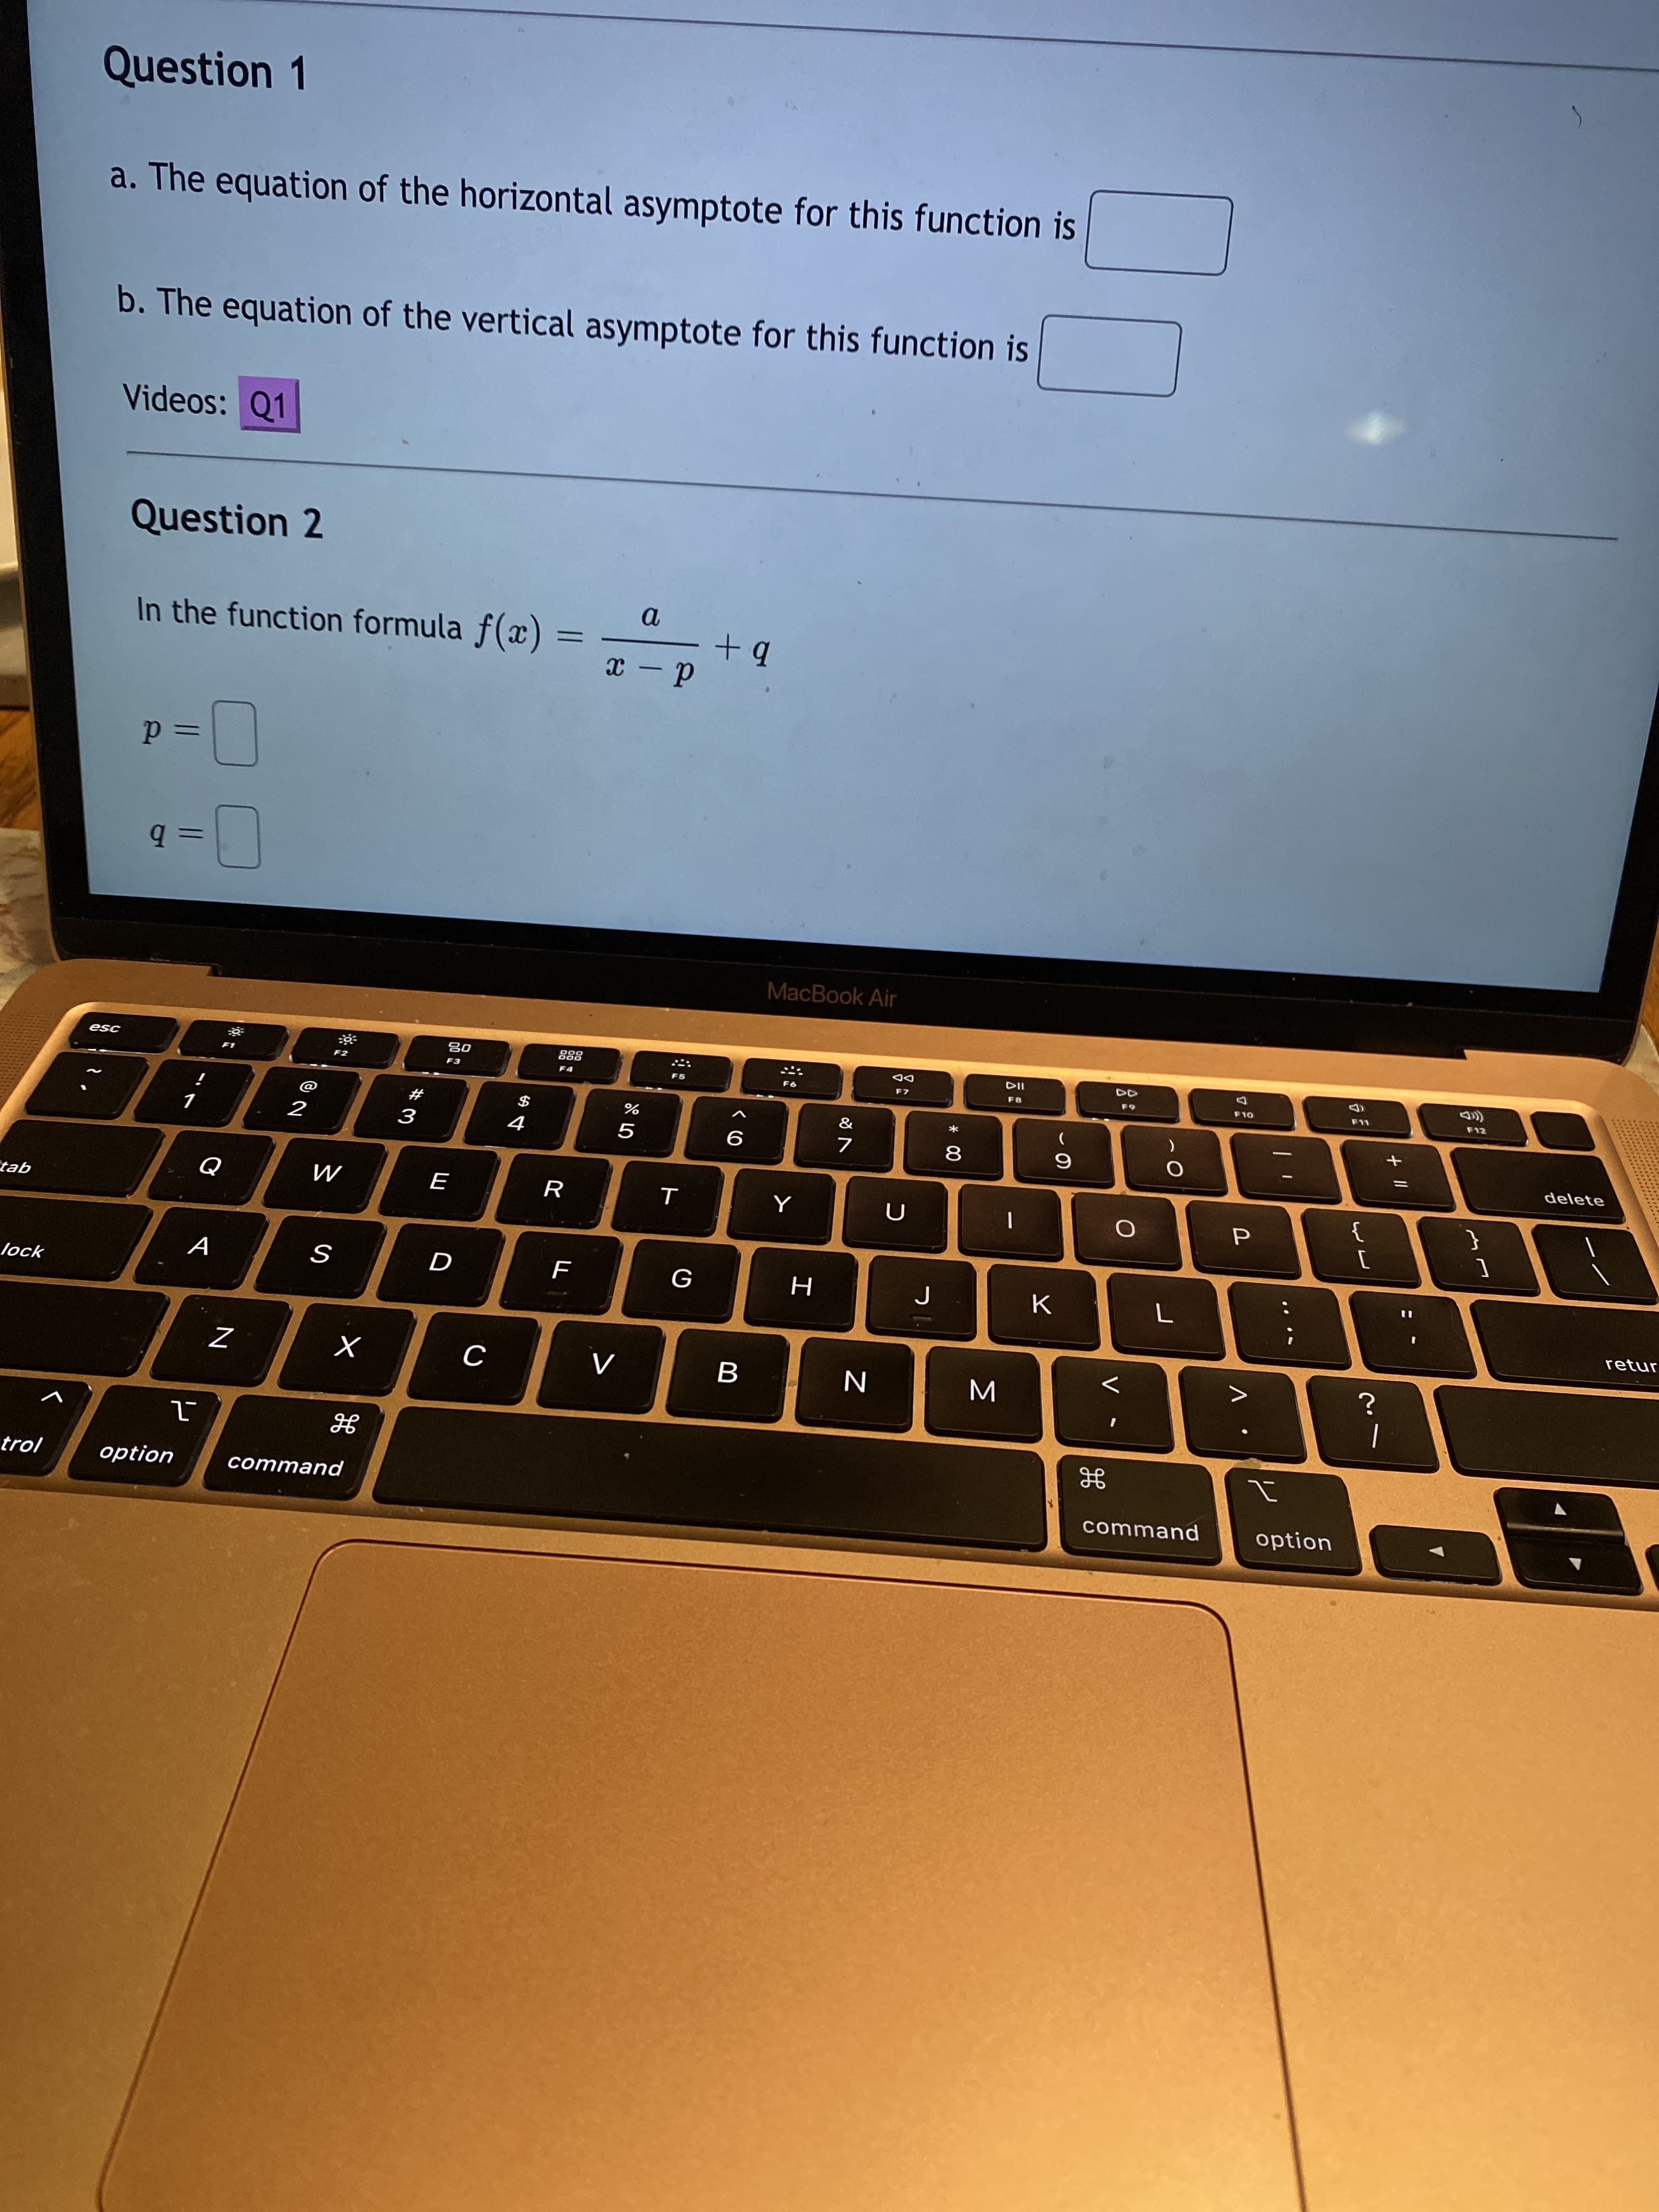 + II
V
* 00
山
N
Question 1
a. The equation of the horizontal asymptote for this function is
b. The equation of the vertical asymptote for this function is
Videos: Q1
Question 2
In the function formula f(x)
d - x
=Dd
ミb
MacBook Air
(D
F12
DD
F8
F3
ISƏ
*
delete
$
%
#
9
8
2
{
R
M
qer
retur
G
A
lock
B
command
option
trol
option
command
